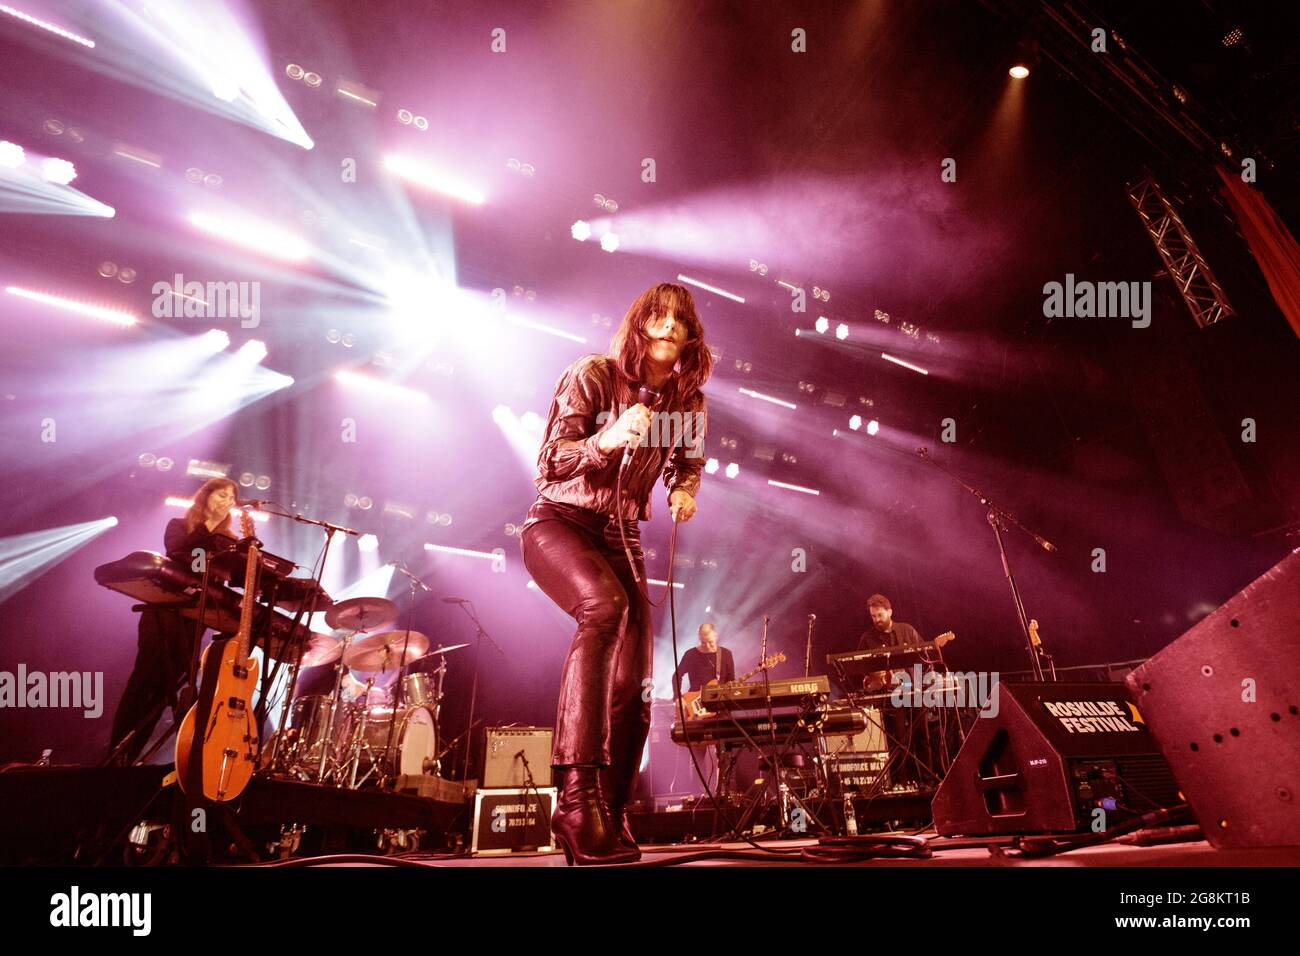 Roskilde, Denmark. July 04th, 2019. The American singer, songwriter and  musician Sharon Van Etten performs a